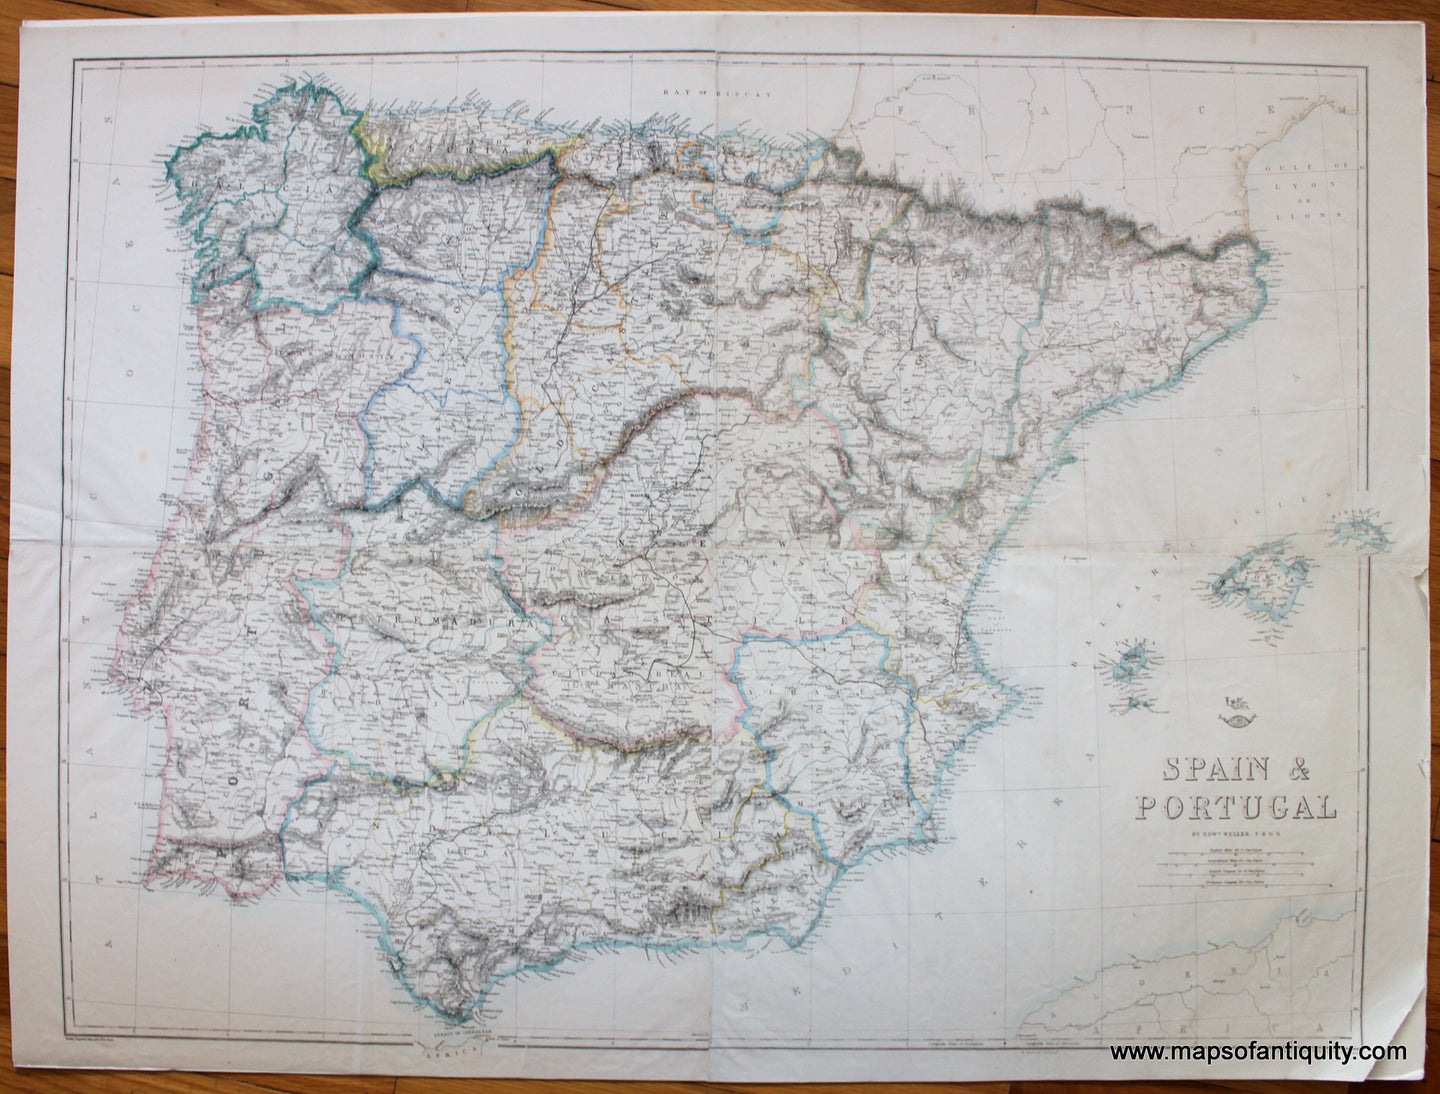 Antique-Map-Spain-&-Portugal-and-Weller-Weekly-Dispatch-1860s-1800s-Mid-Late-19th-Century-Maps-of-Antiquity